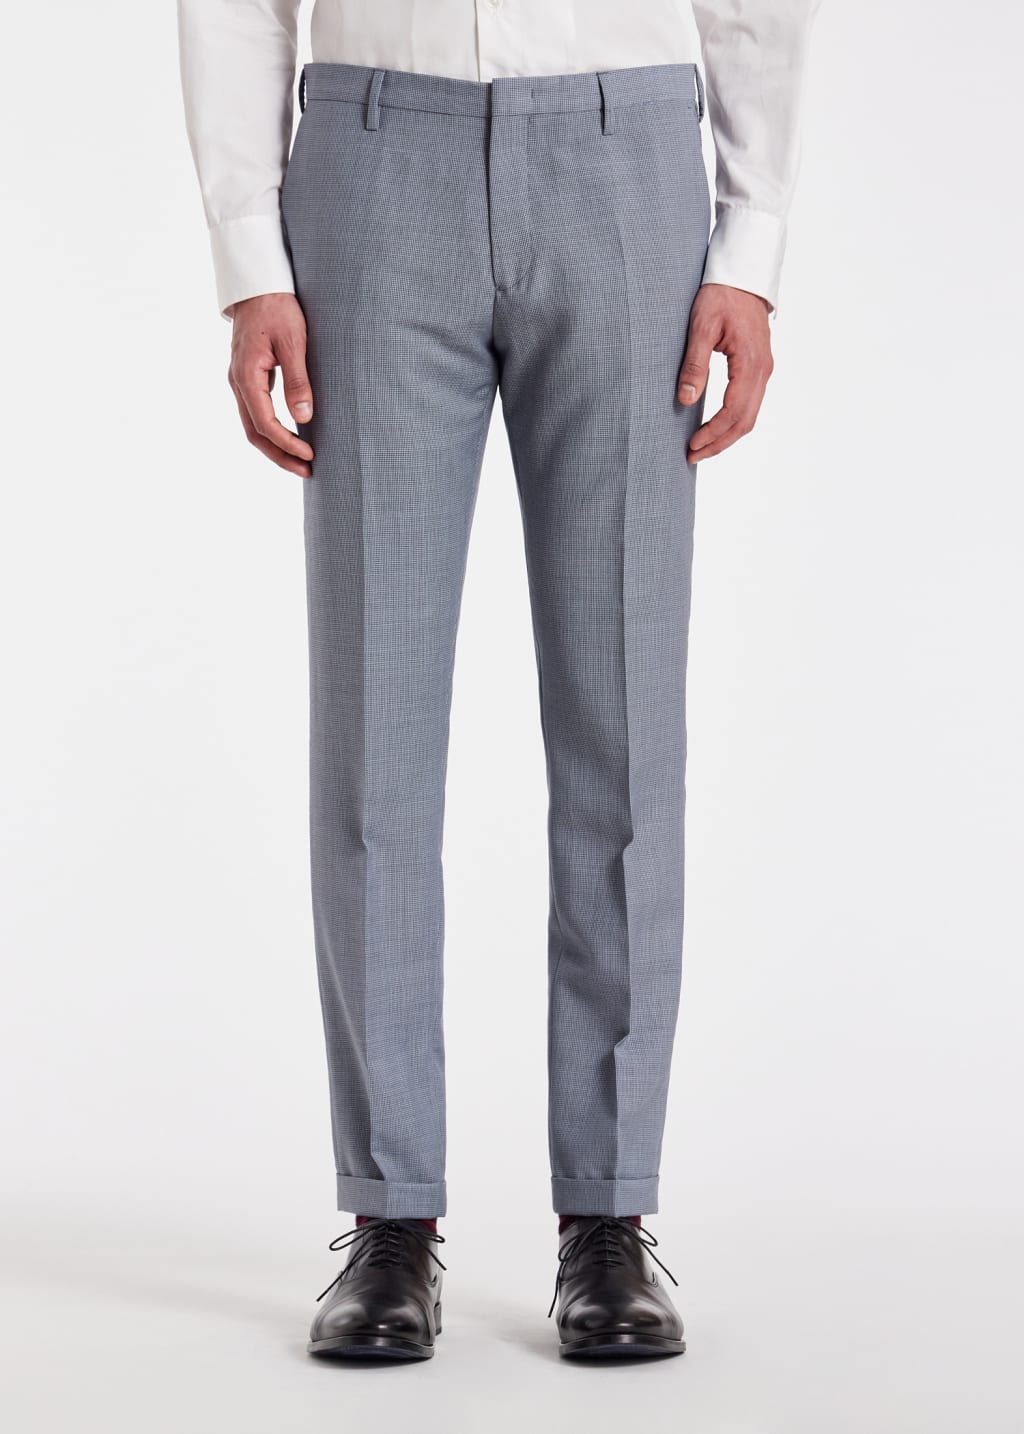 Wool mohair pant in white